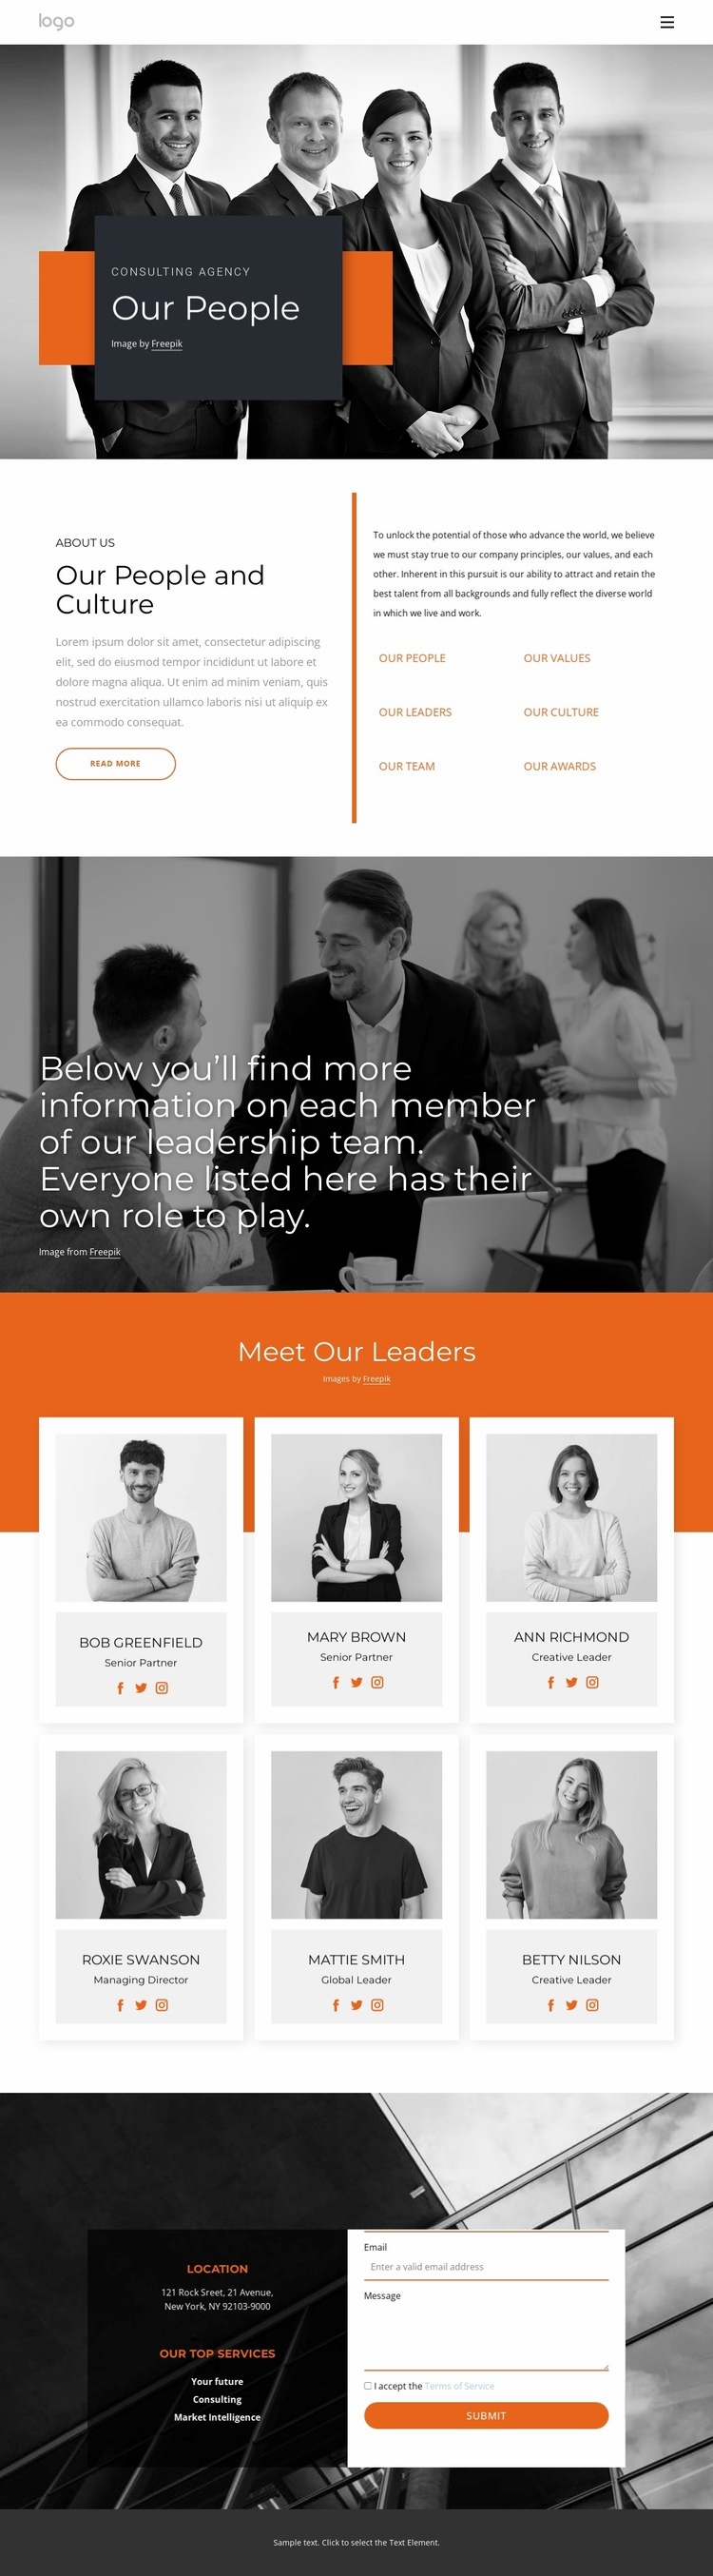 Our people and our culture Homepage Design